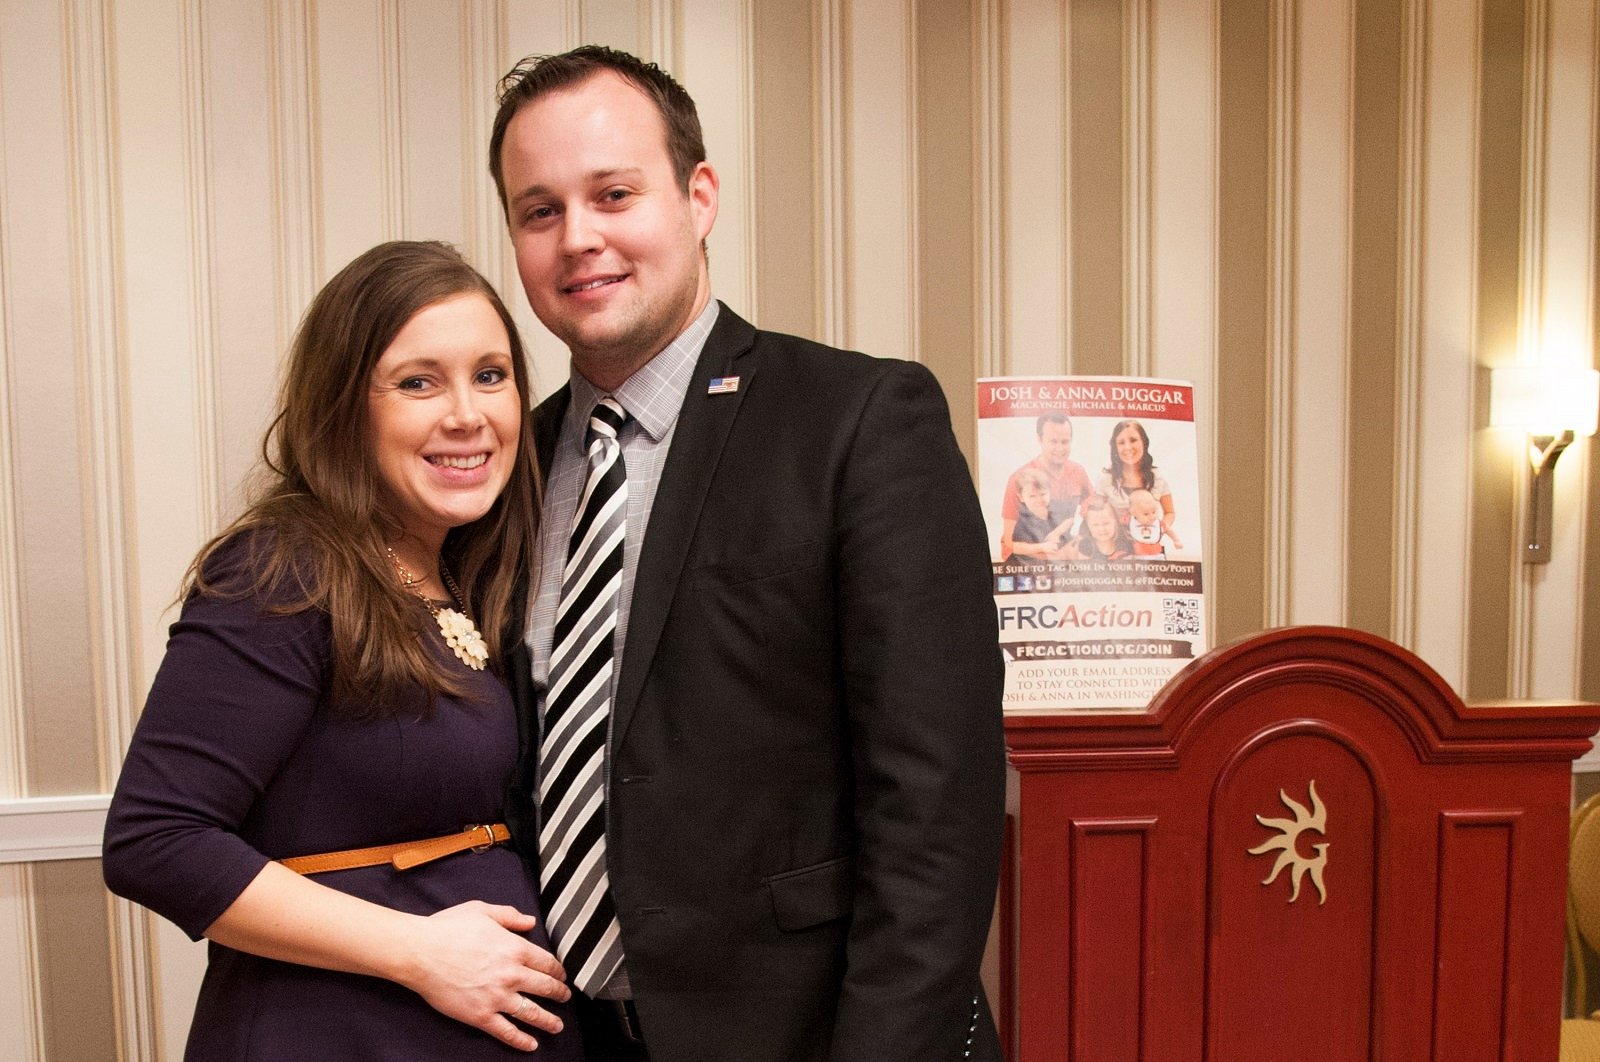 Josh and a pregnant Anna Duggar of the Duggar family standing together and smiling at a conservative convention